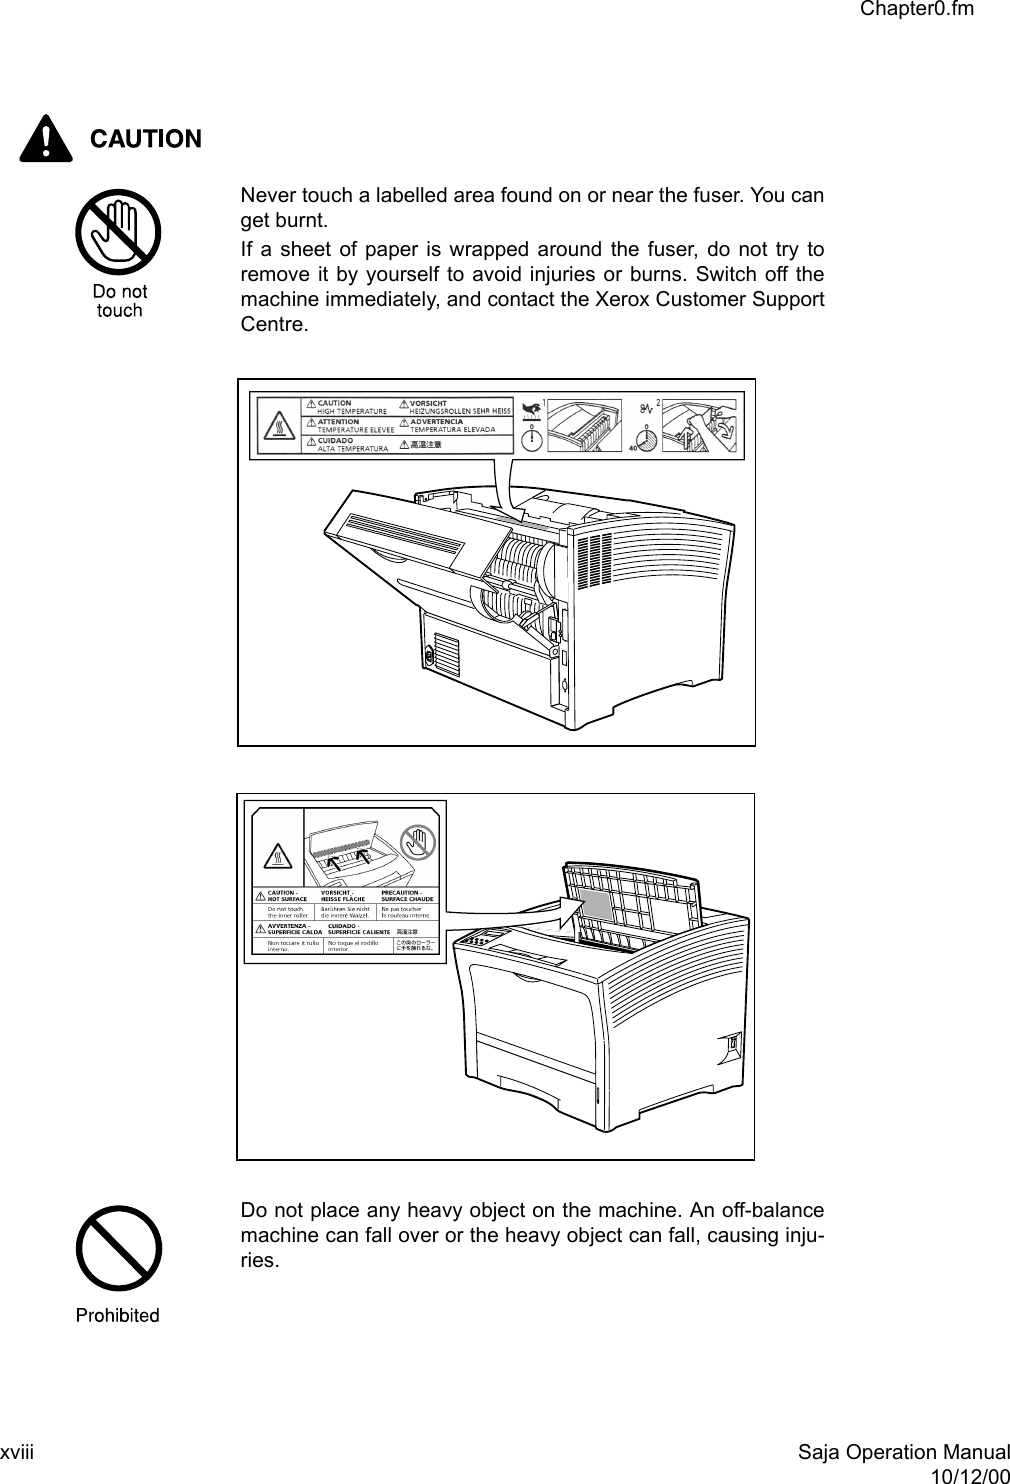 xviii Saja Operation Manual10/12/00Chapter0.fmNever touch a labelled area found on or near the fuser. You canget burnt.If a sheet of paper is wrapped around the fuser, do not try toremove it by yourself to avoid injuries or burns. Switch off themachine immediately, and contact the Xerox Customer SupportCentre.Do not place any heavy object on the machine. An off-balancemachine can fall over or the heavy object can fall, causing inju-ries.